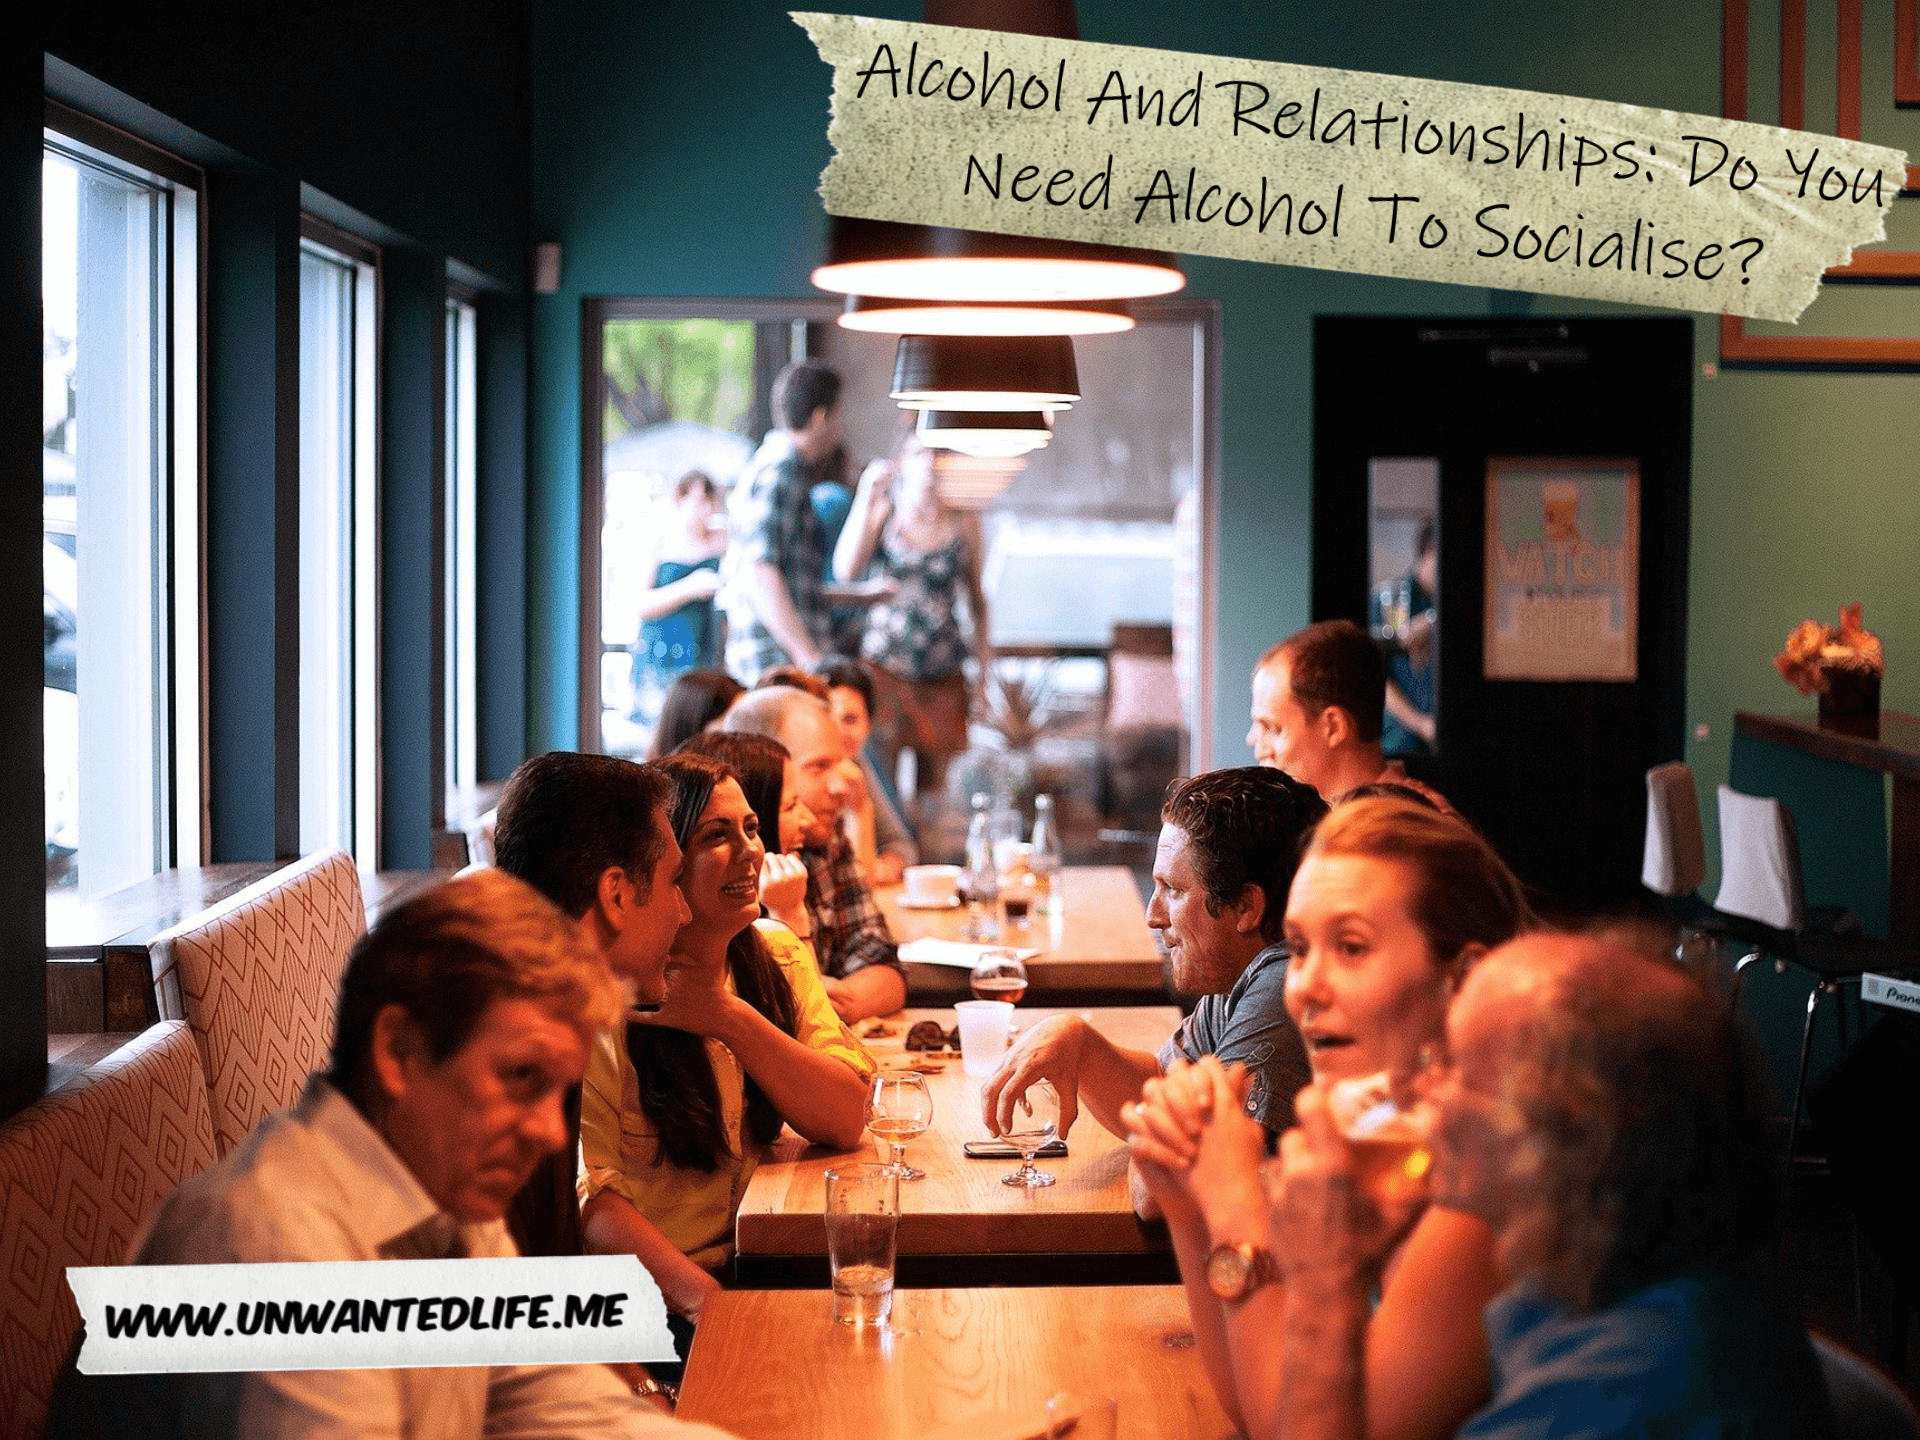 A photo of people sitting down at a pub drinking to represent the topic of the article - Alcohol And Relationships: Do You Need Alcohol To Socialise?